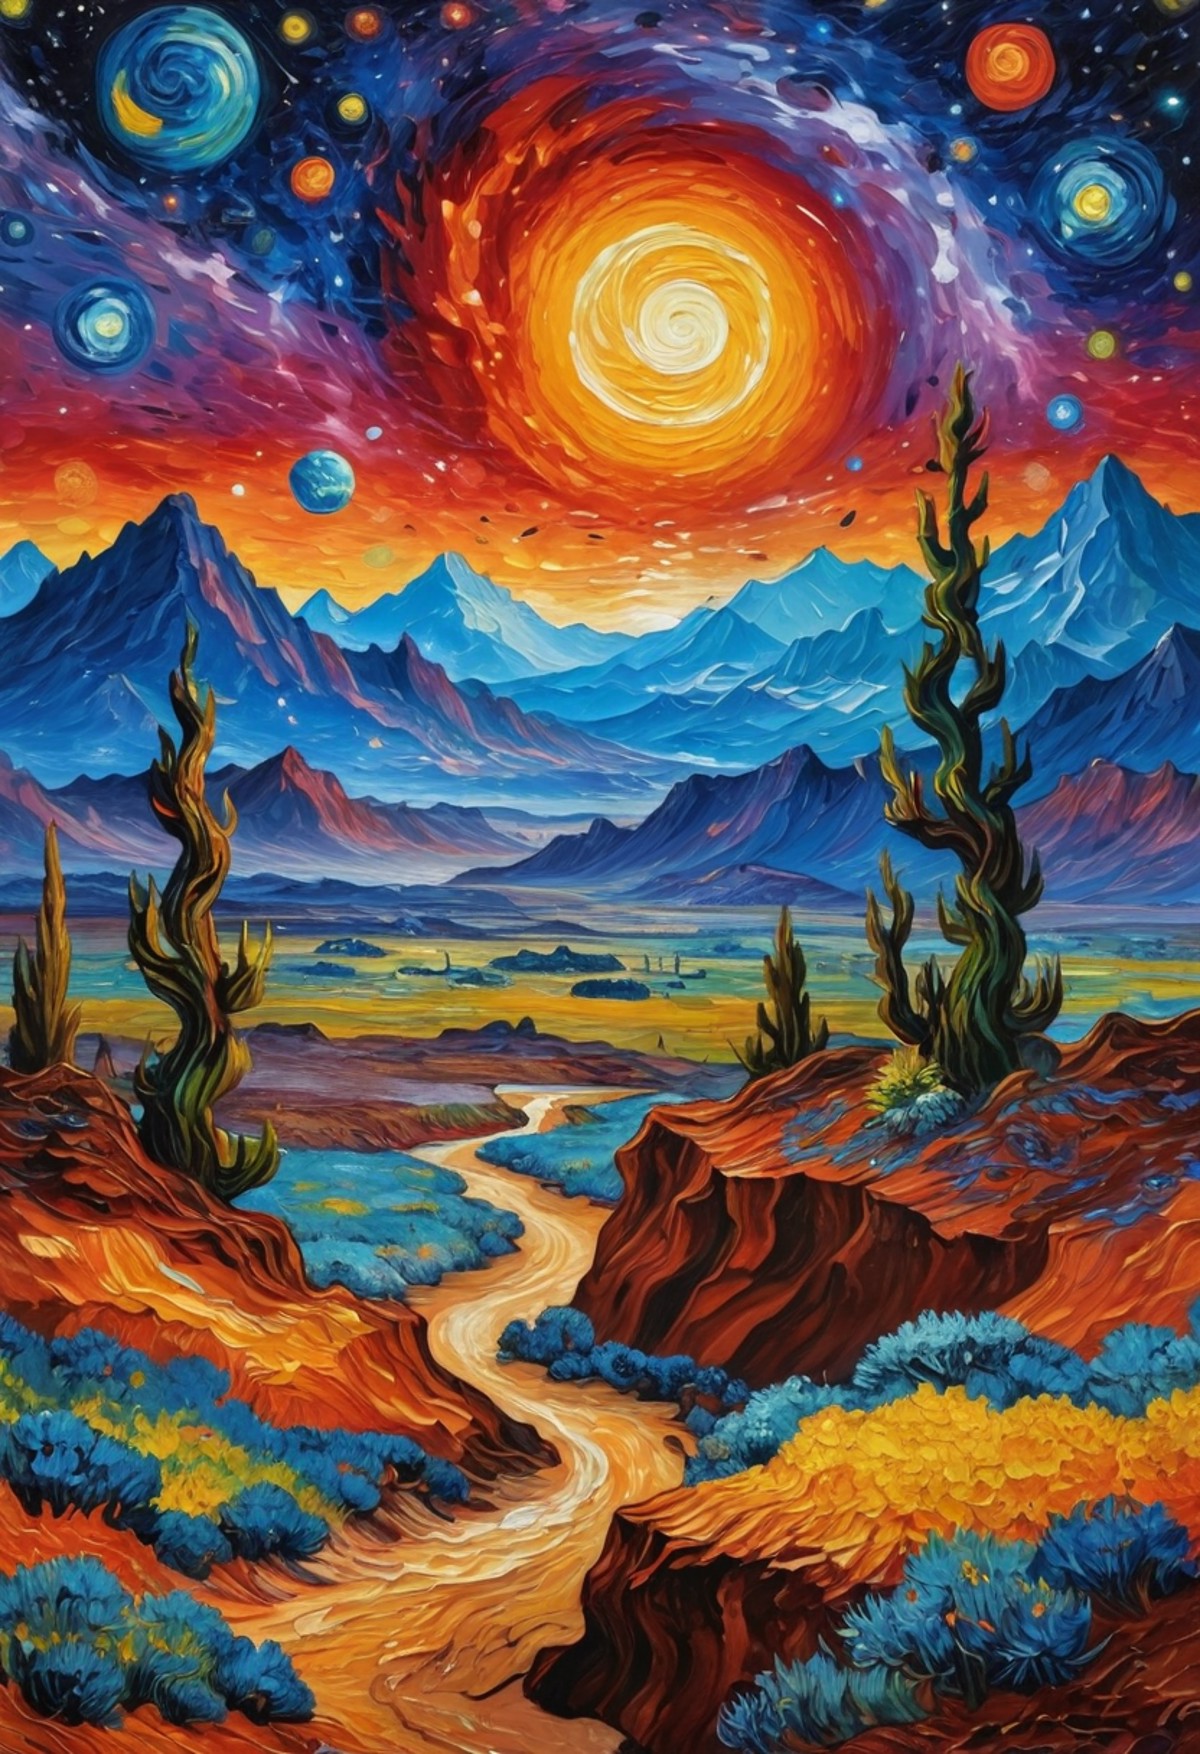 masterpiece, An oil painting of an alien planet, Van Gogh, galaxy in background, vibrant colors, best quality, highly deta...